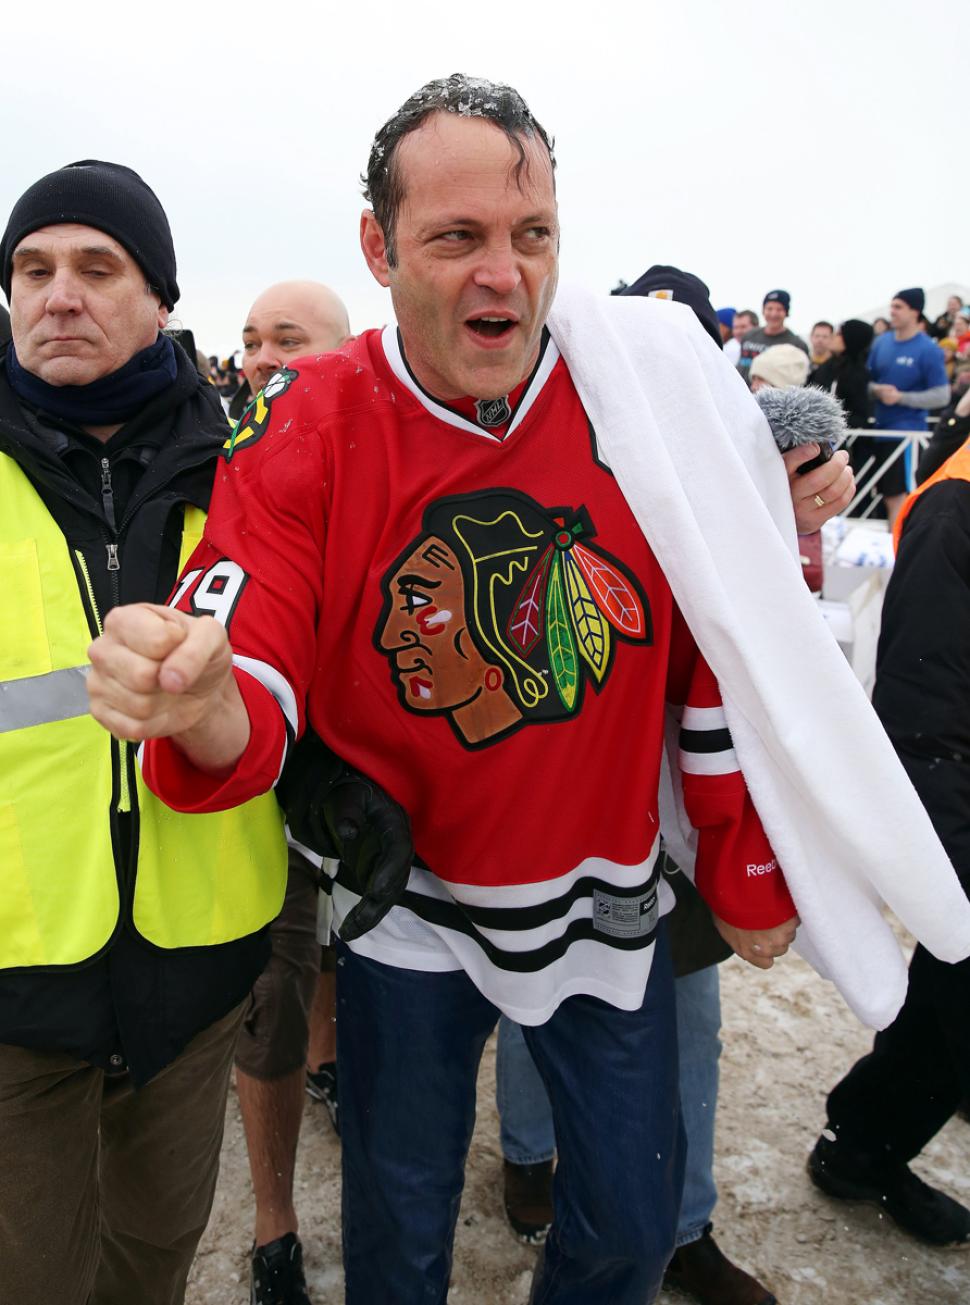 CHICAGO, IL - MARCH 01: Vince Vaughn participates in the Chicago Polar Plunge 2015 at North Avenue Beach on March 1, 2015 in Chicago, Illinois. (Photo by Tasos Katopodis/Getty Images)